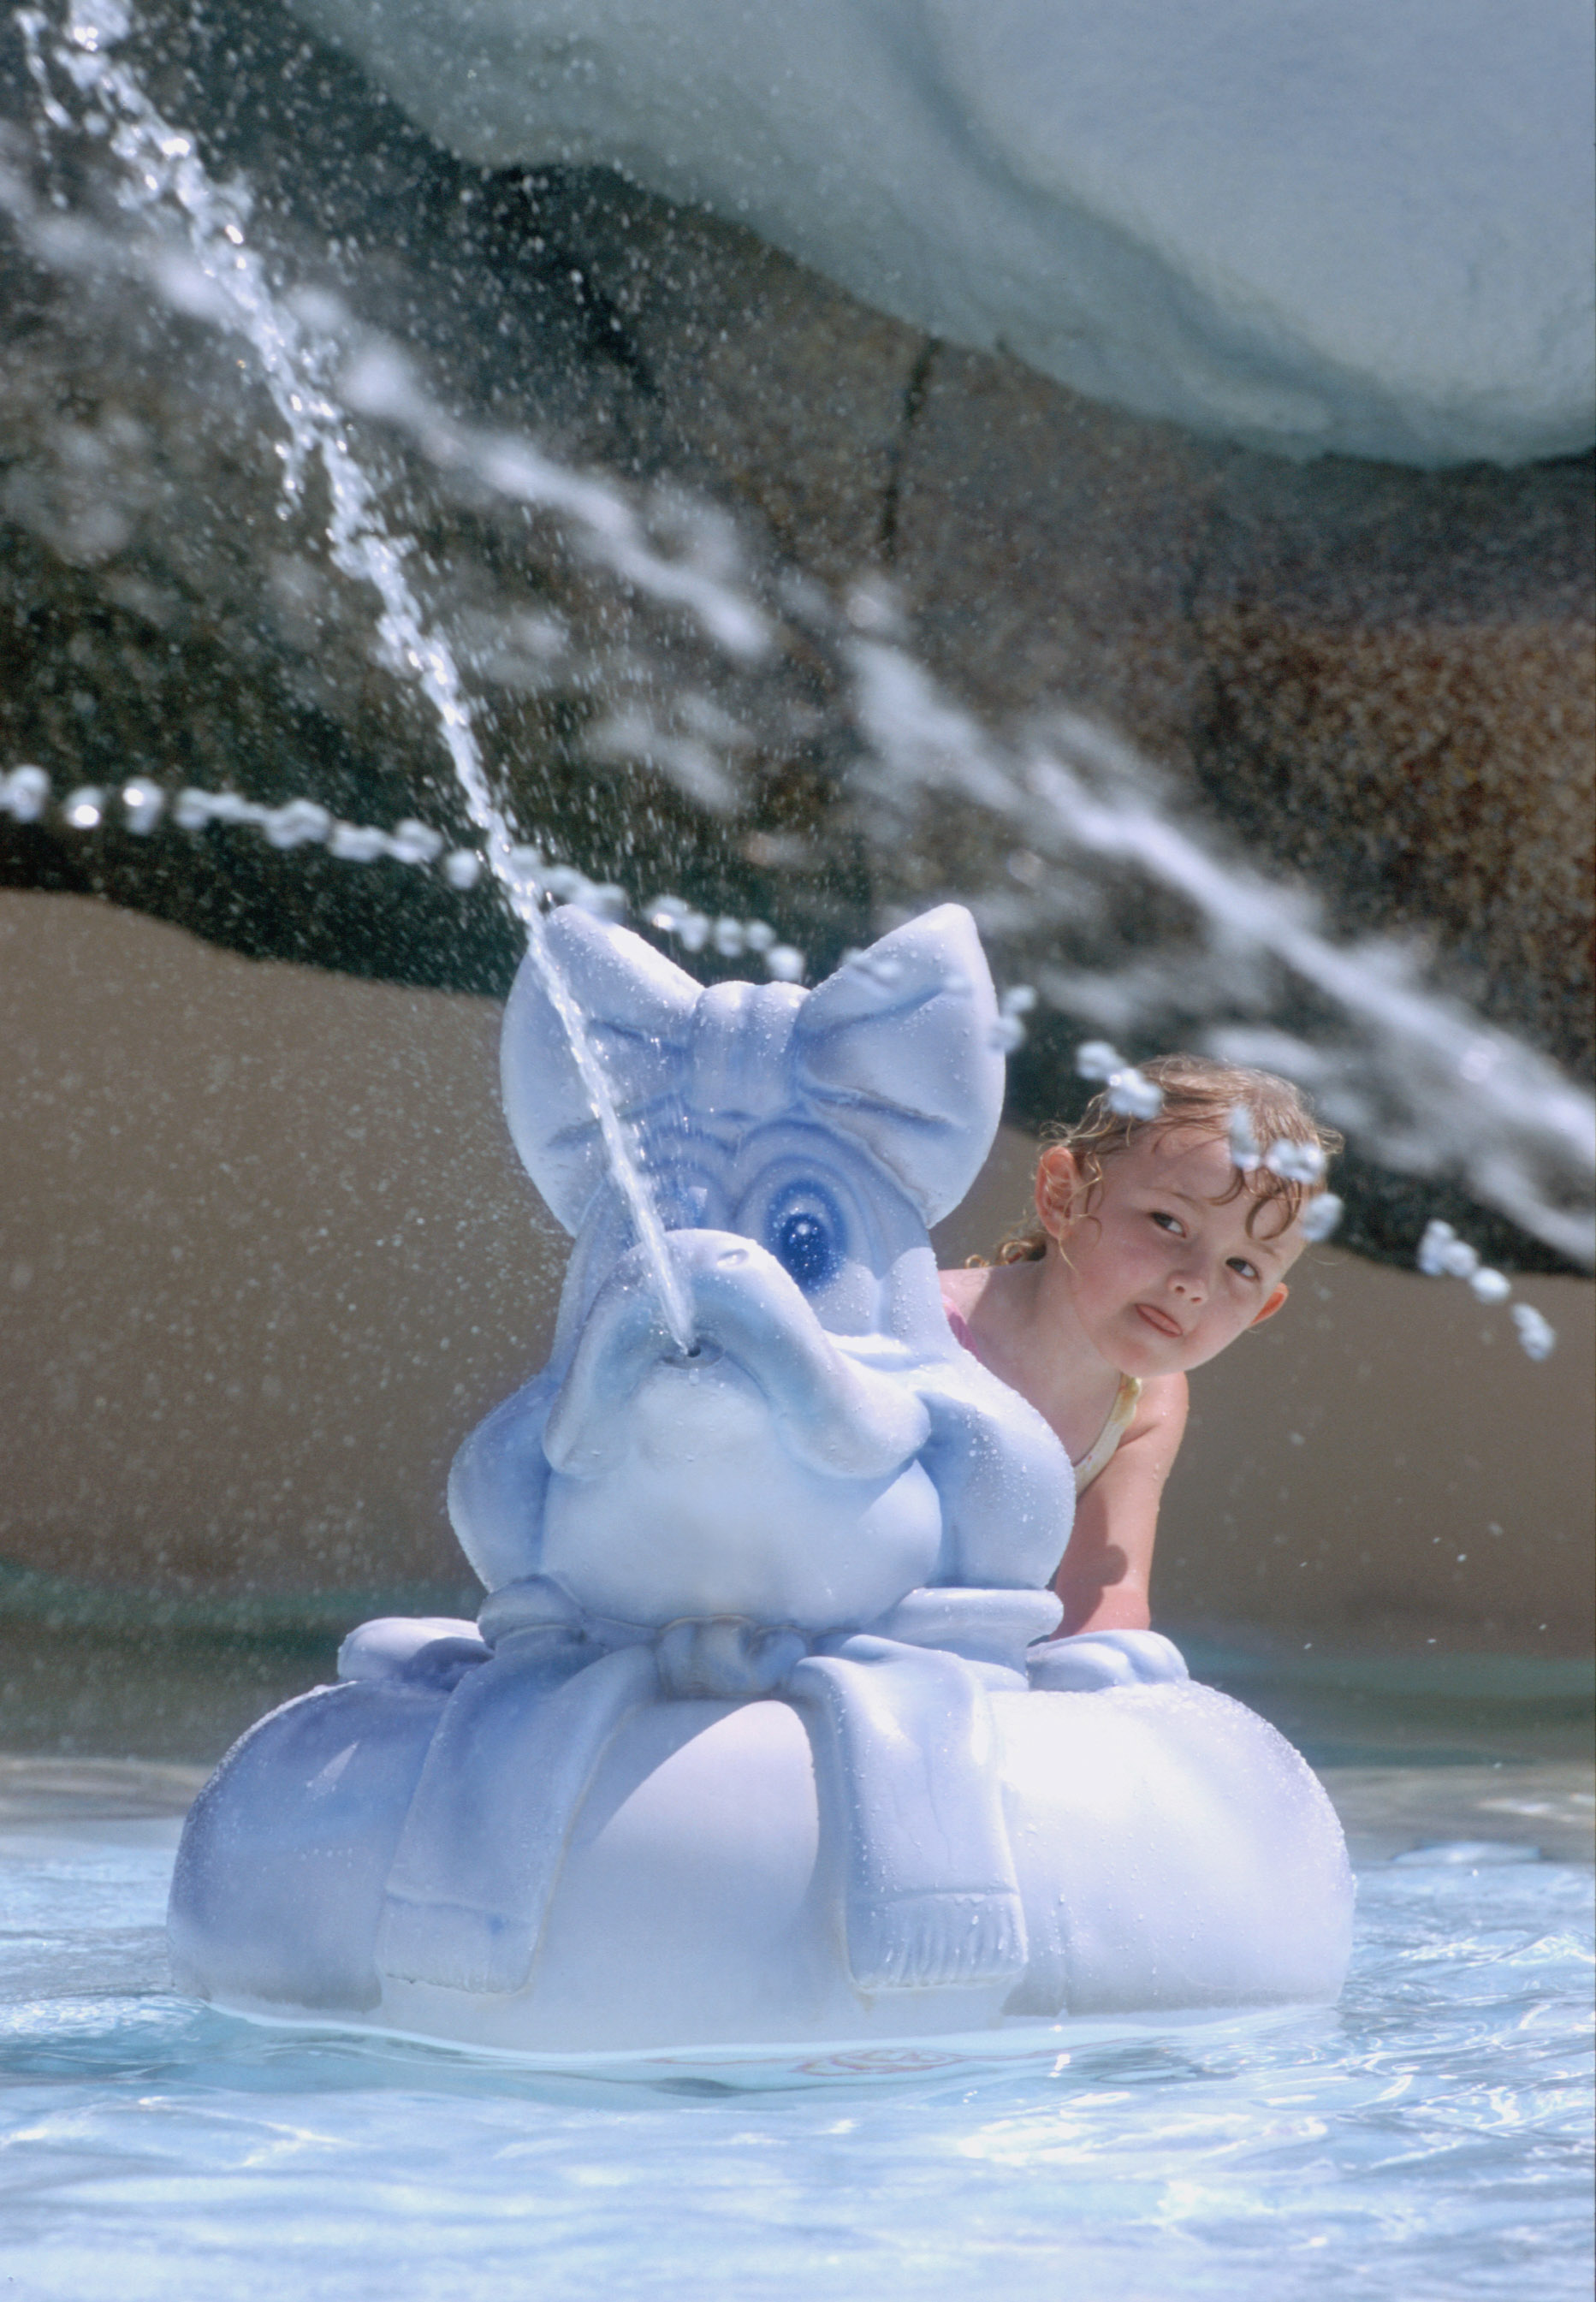 Pixie Dust Central: 6 Ways To Stay Cool In The Summer At Walt Disney World